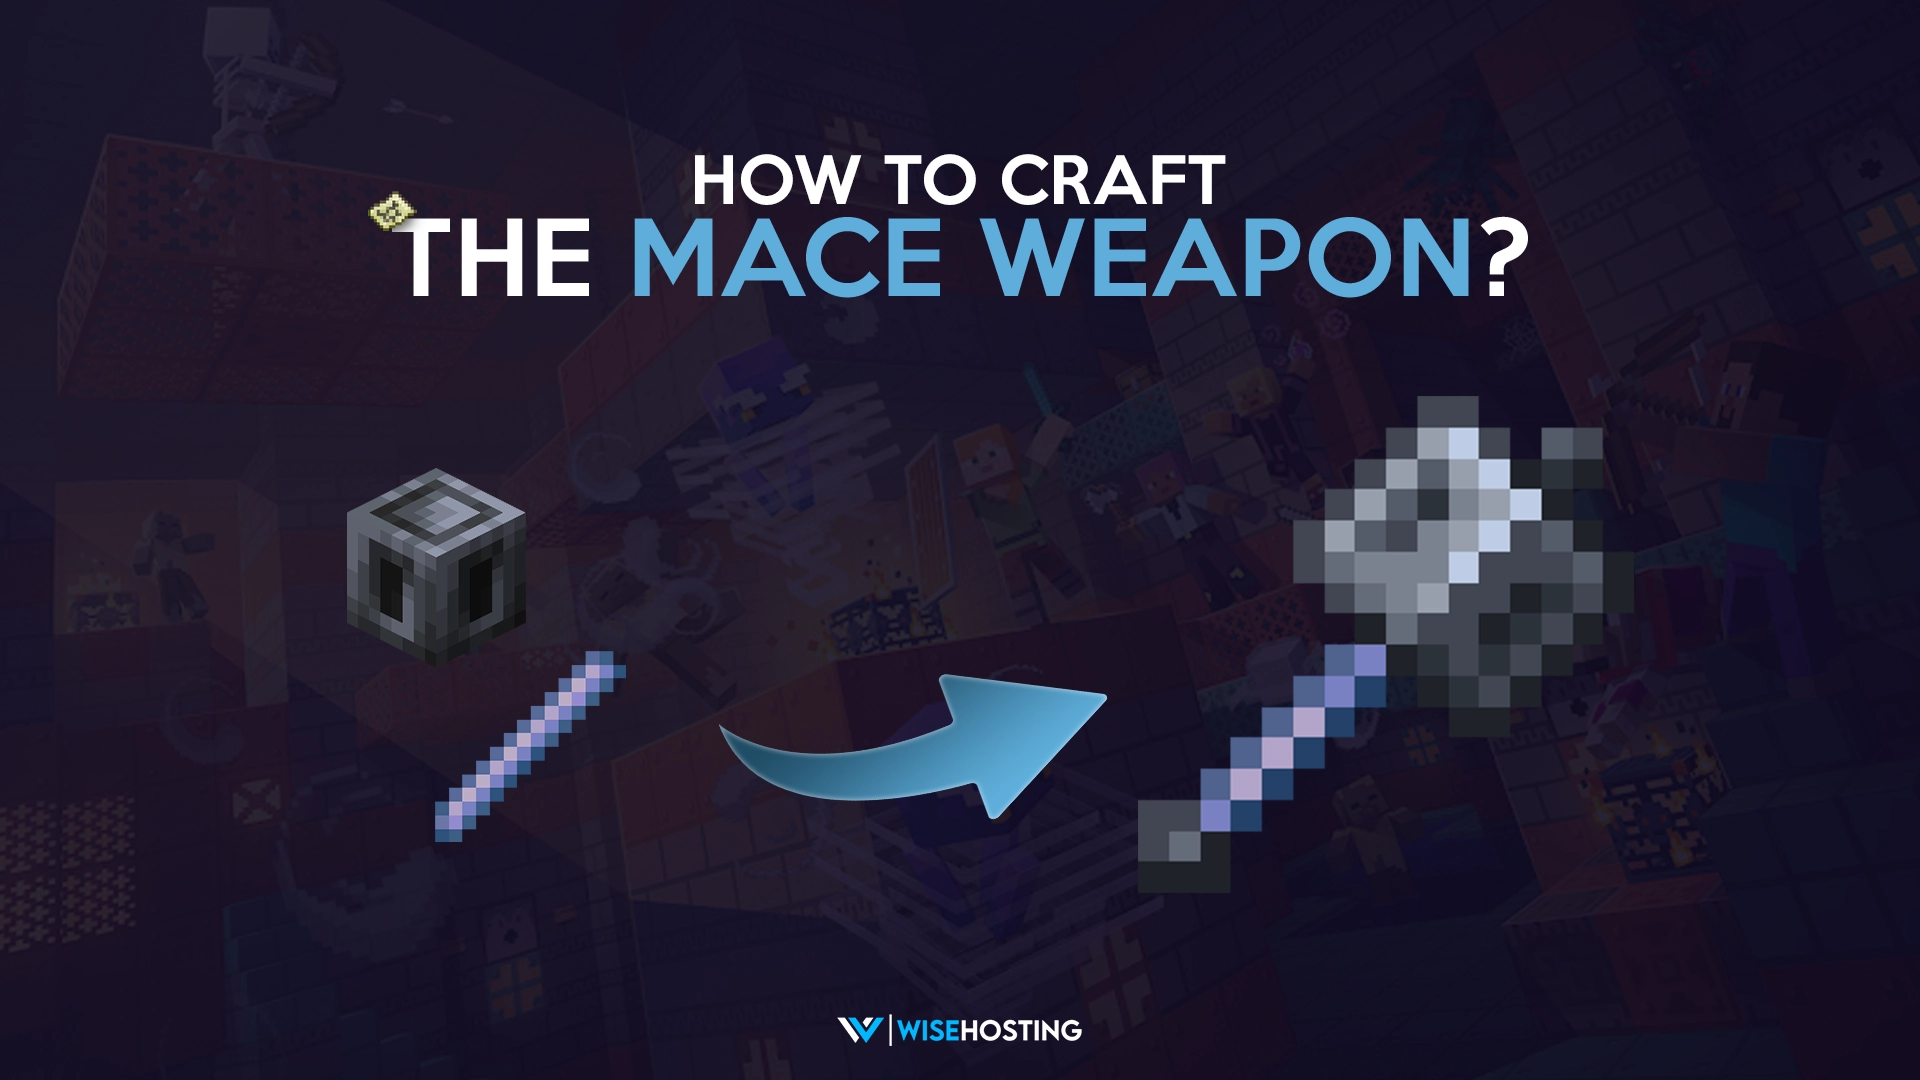 Crafing The Mace Weapon Blog Image